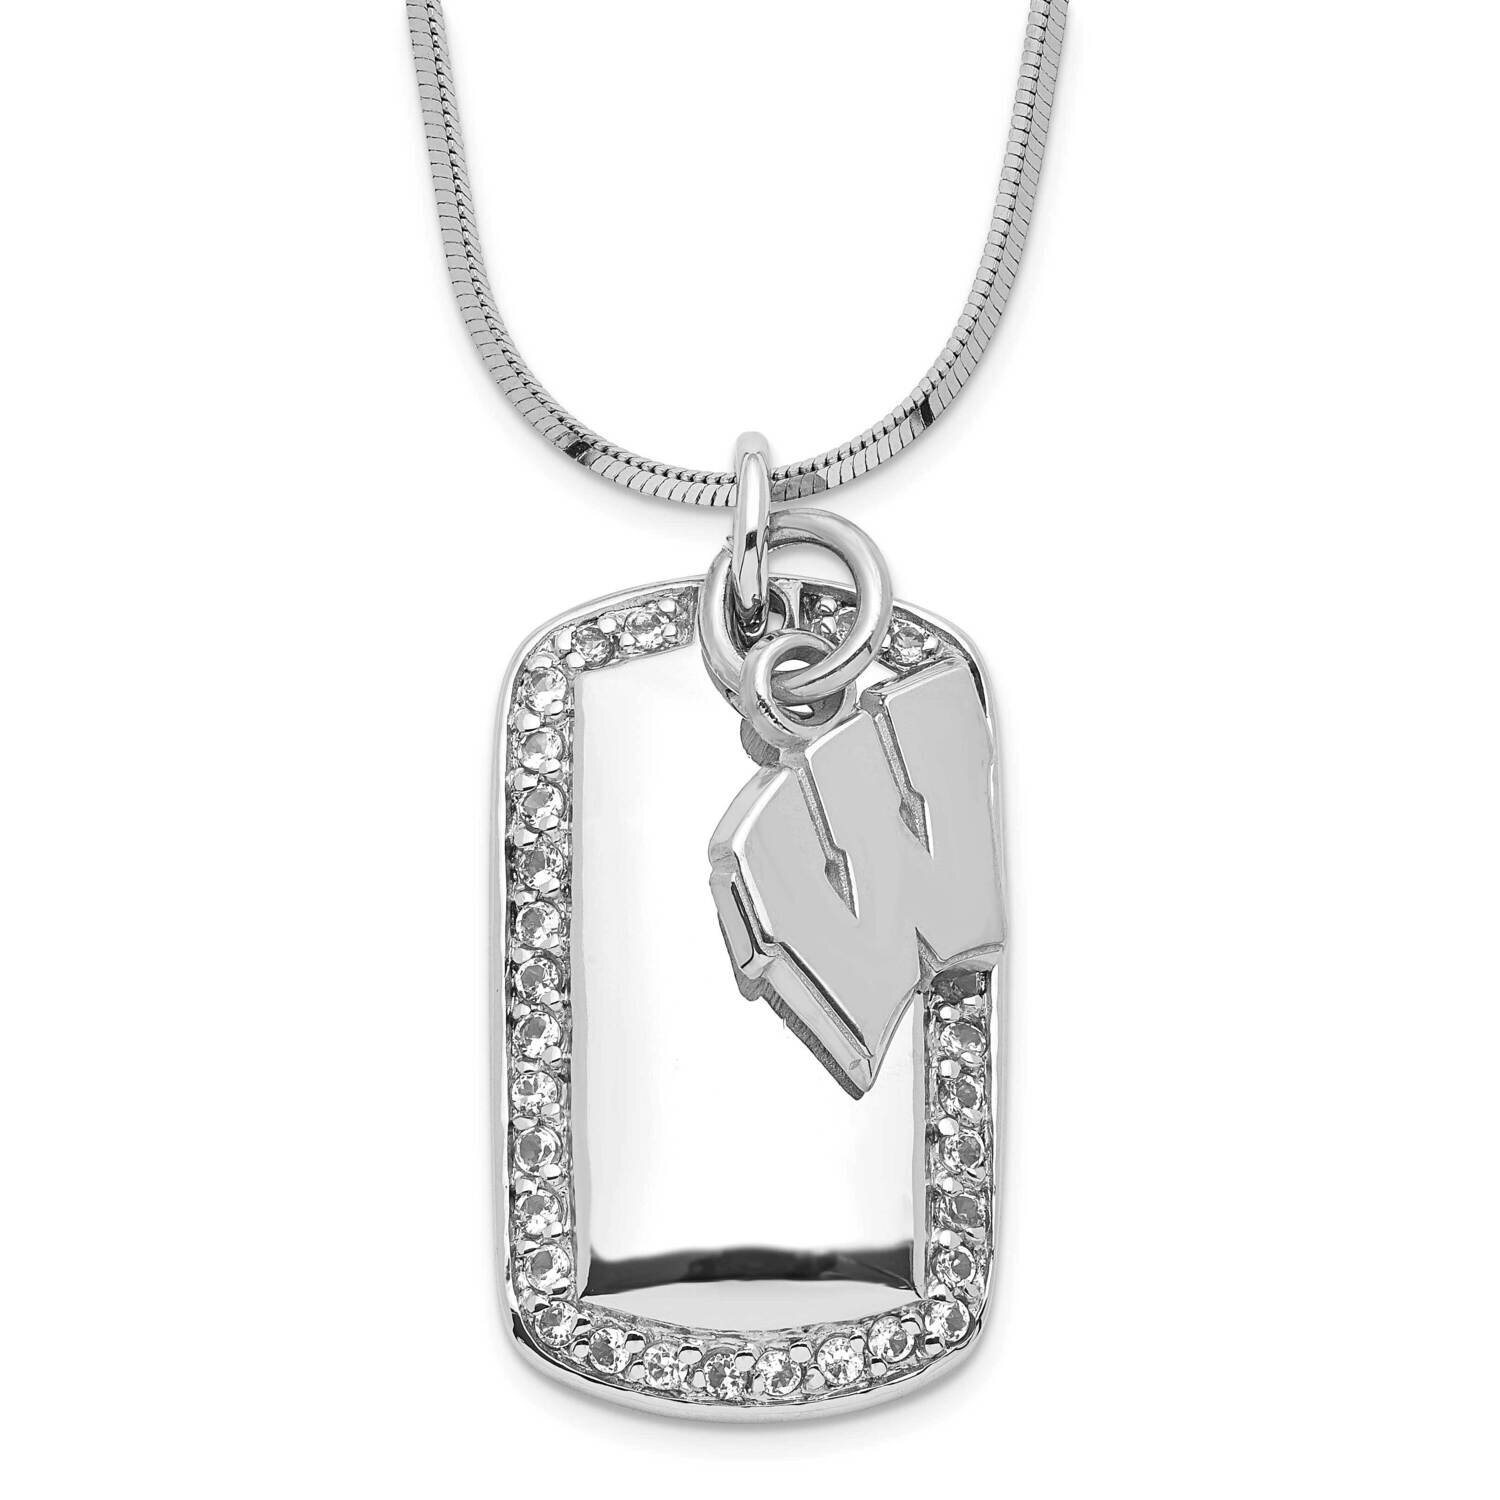 University of Wisconsin Polished Logo CZ Dogtag Necklace Sterling Silver UWI031DT-SS